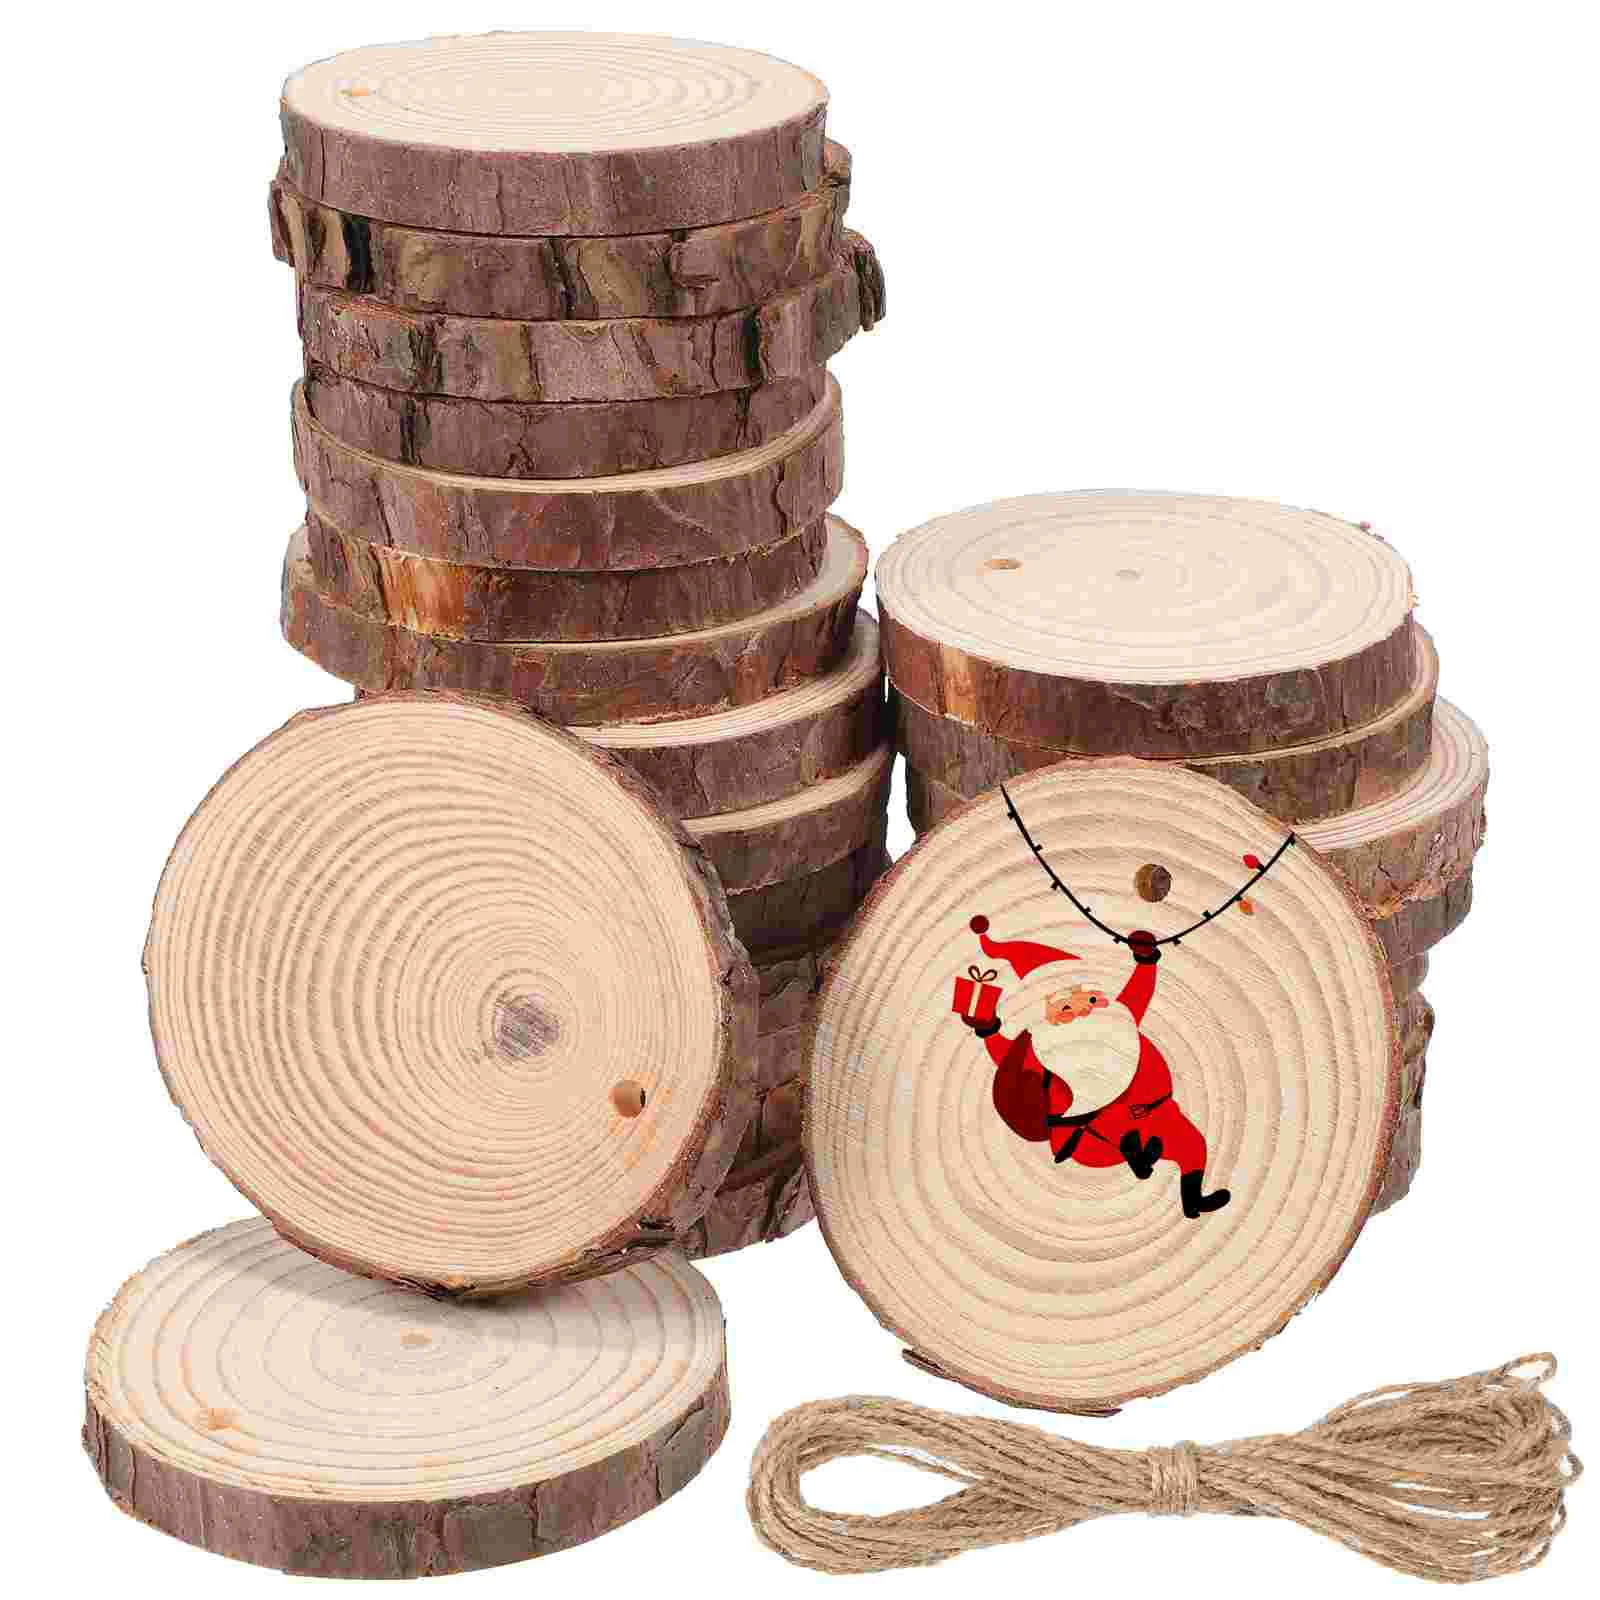 

25 Pcs Wood Slices Unfinished Round for Painting Decor Craft DIY Christmas Ornaments Coaster Decorations Natural Fir Chips